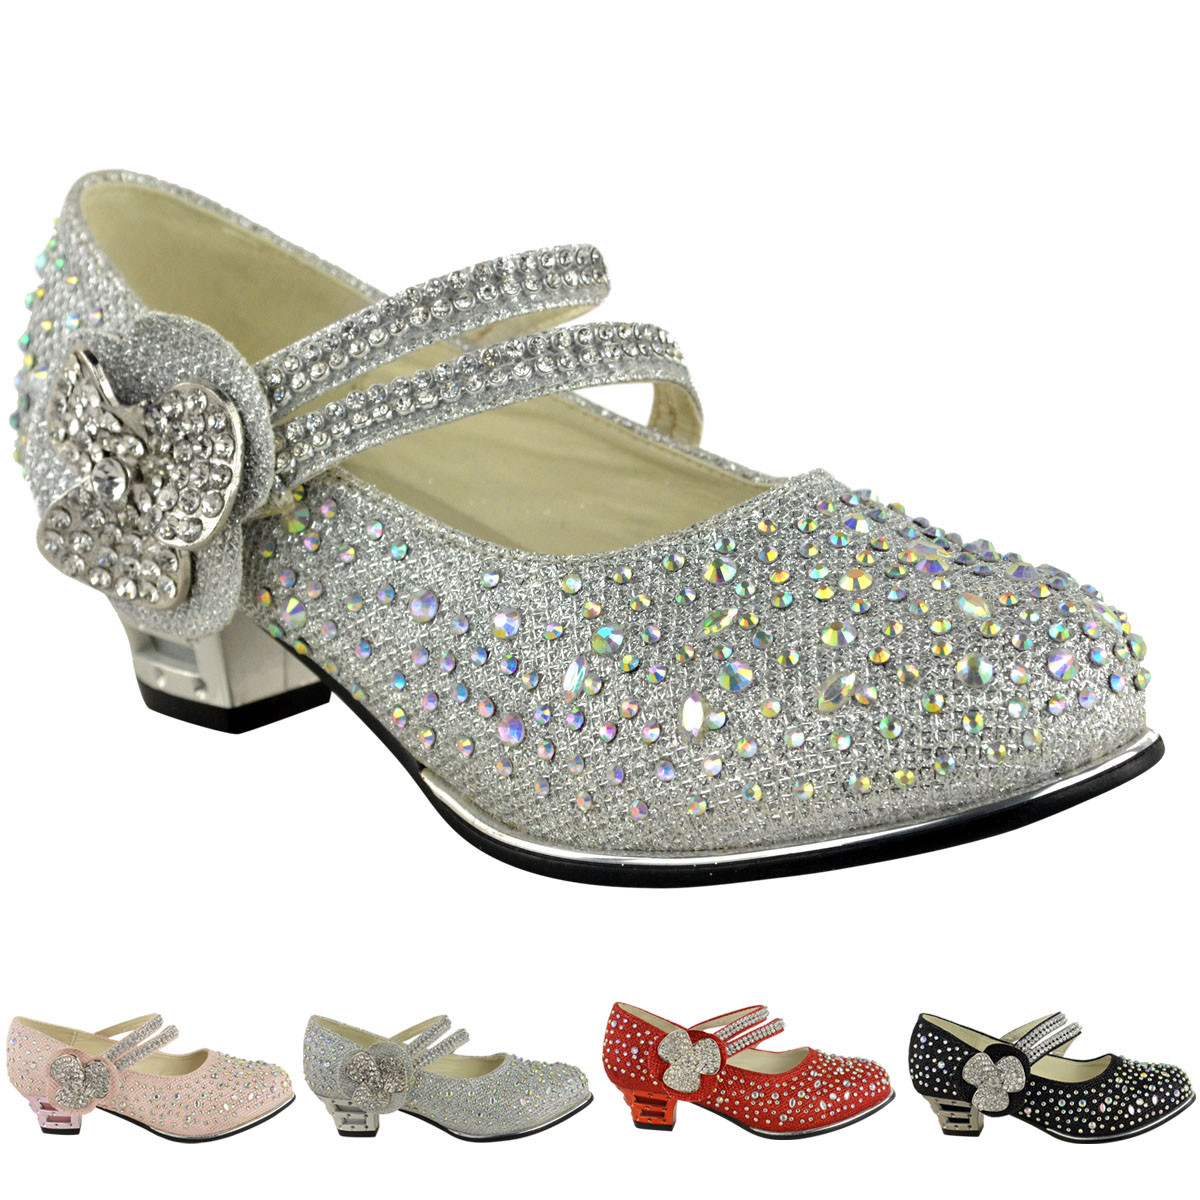 Kids Party Shoes
 Childrens Girls Kids Low Mid High Heel Diamante Party